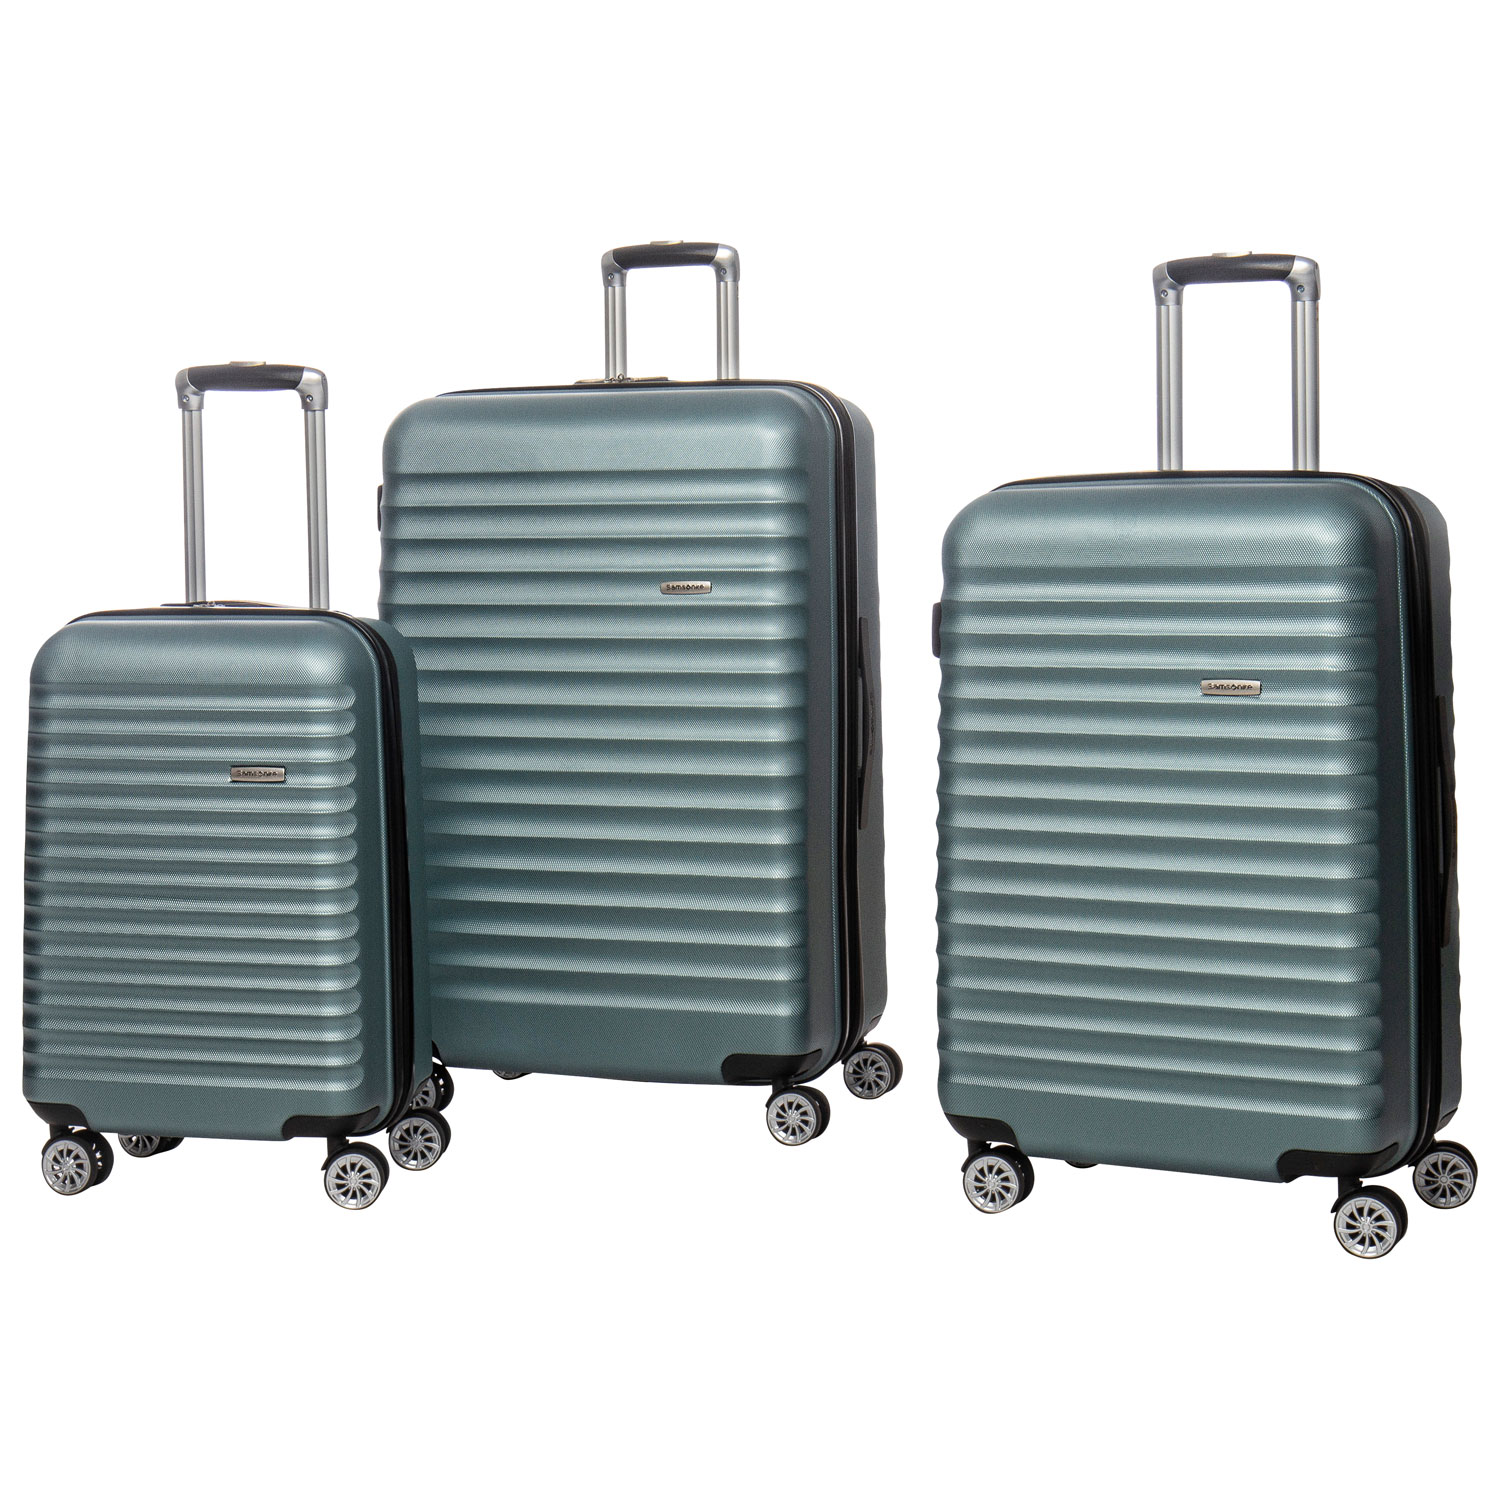 Samsonite Ovation 3-Piece Hard Side Expandable Luggage Set - Dawn Green - Only at Best Buy